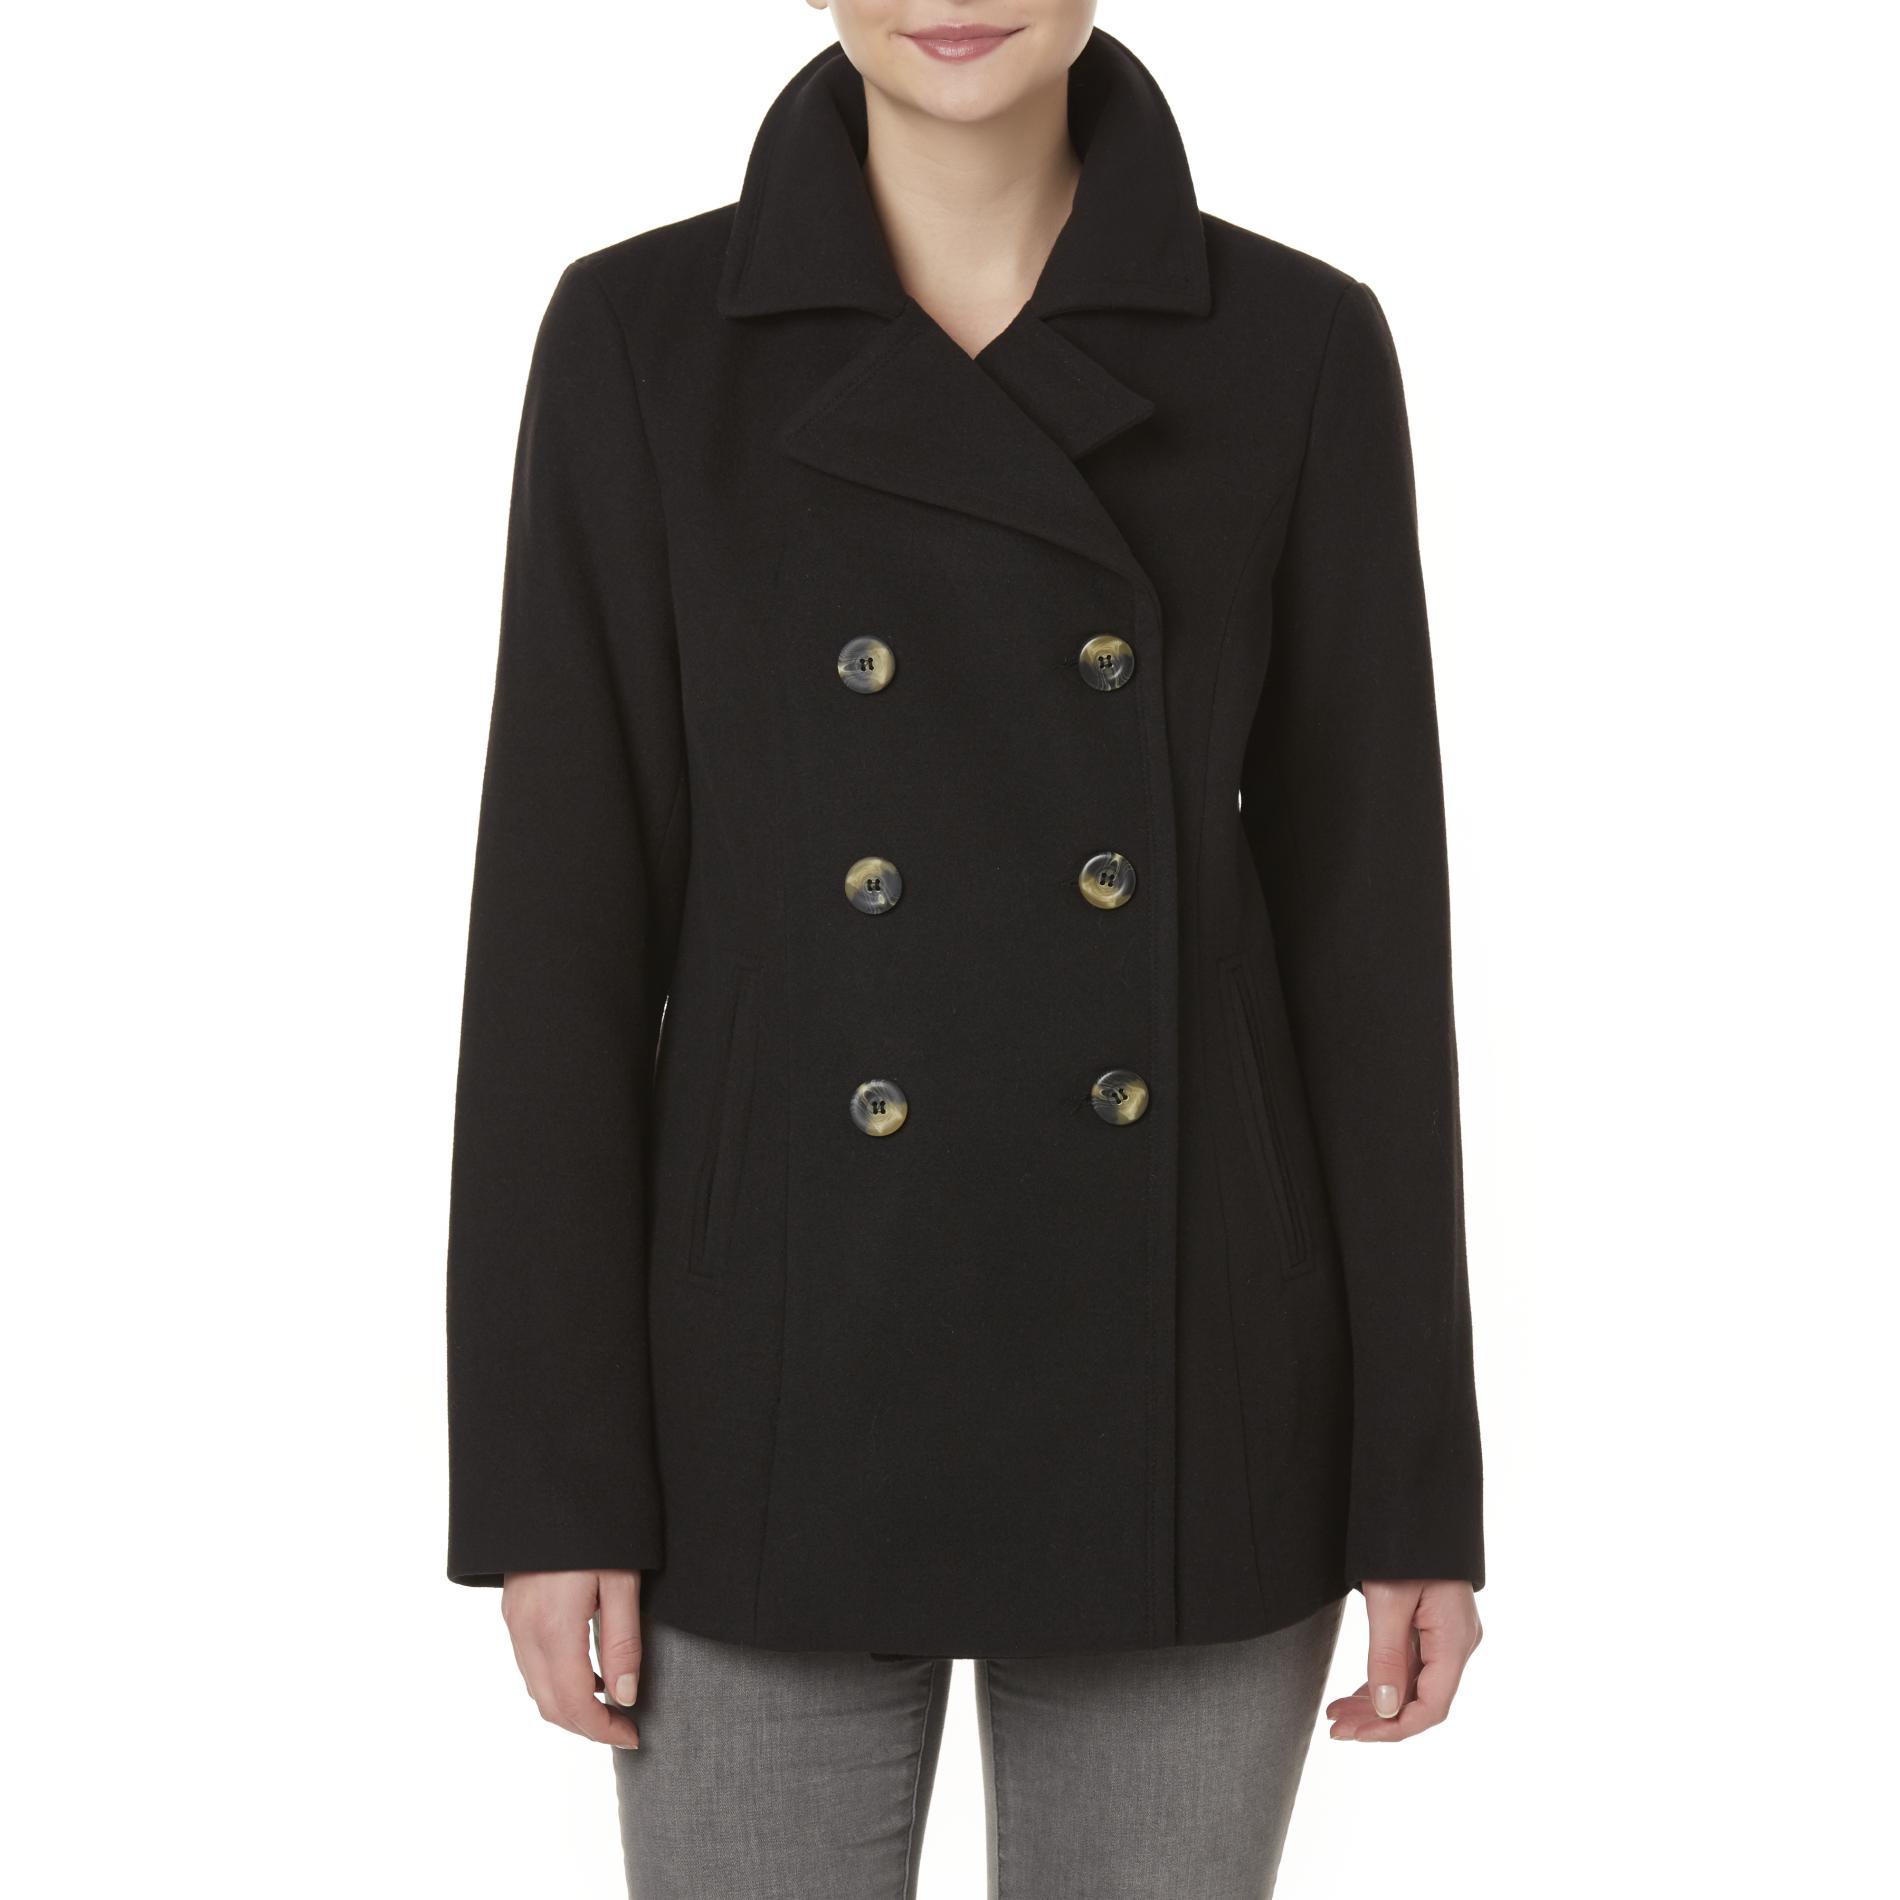 Simply Styled Women's Double Breasted Peacoat